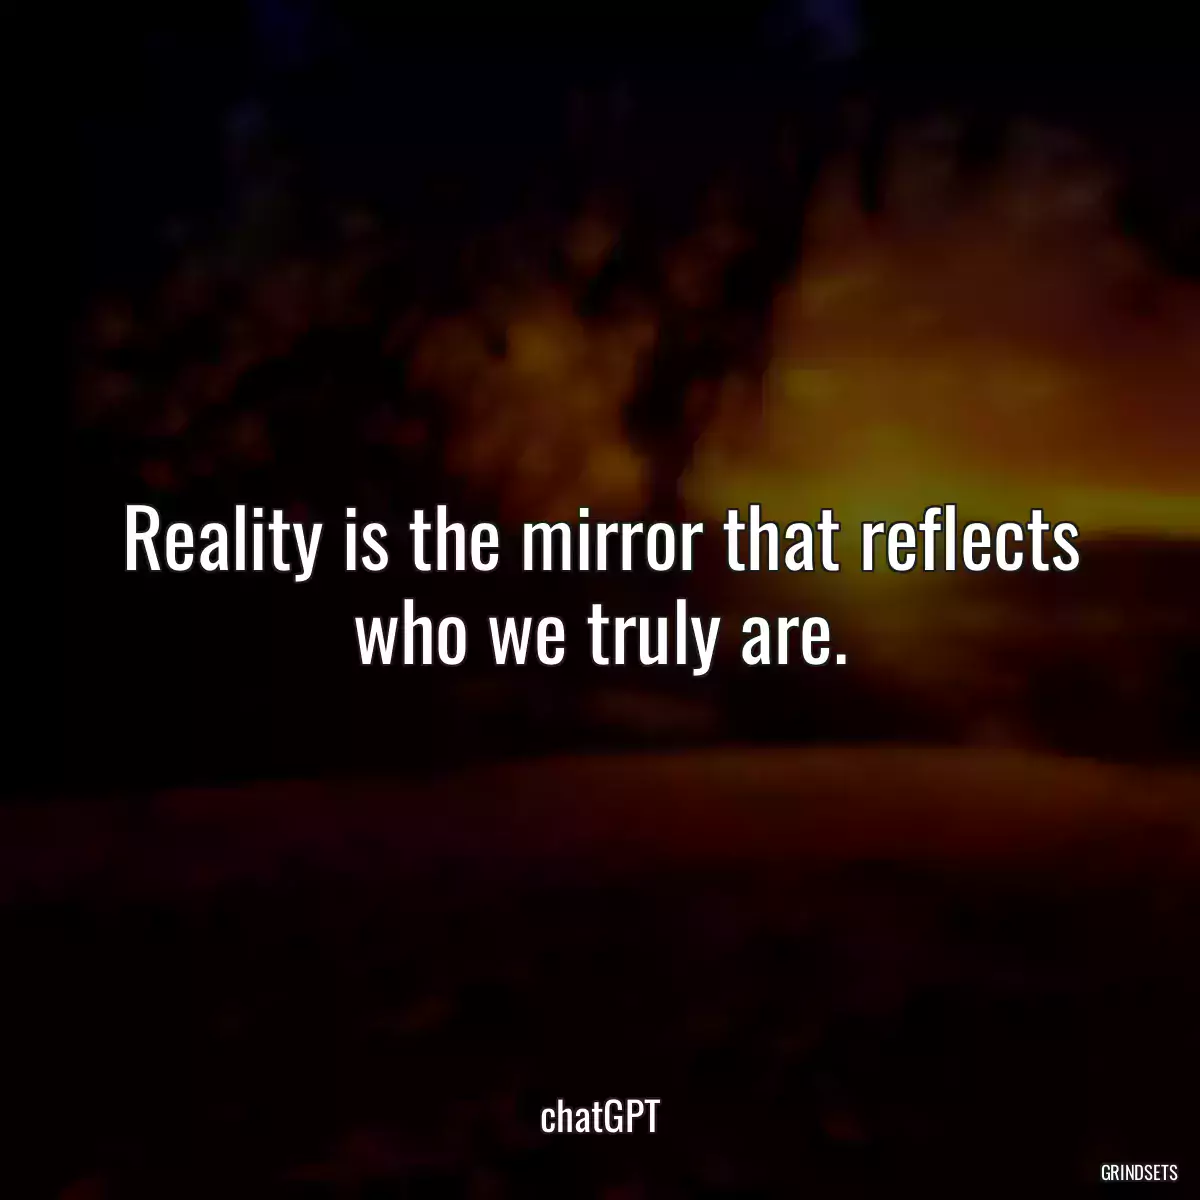 Reality is the mirror that reflects who we truly are.